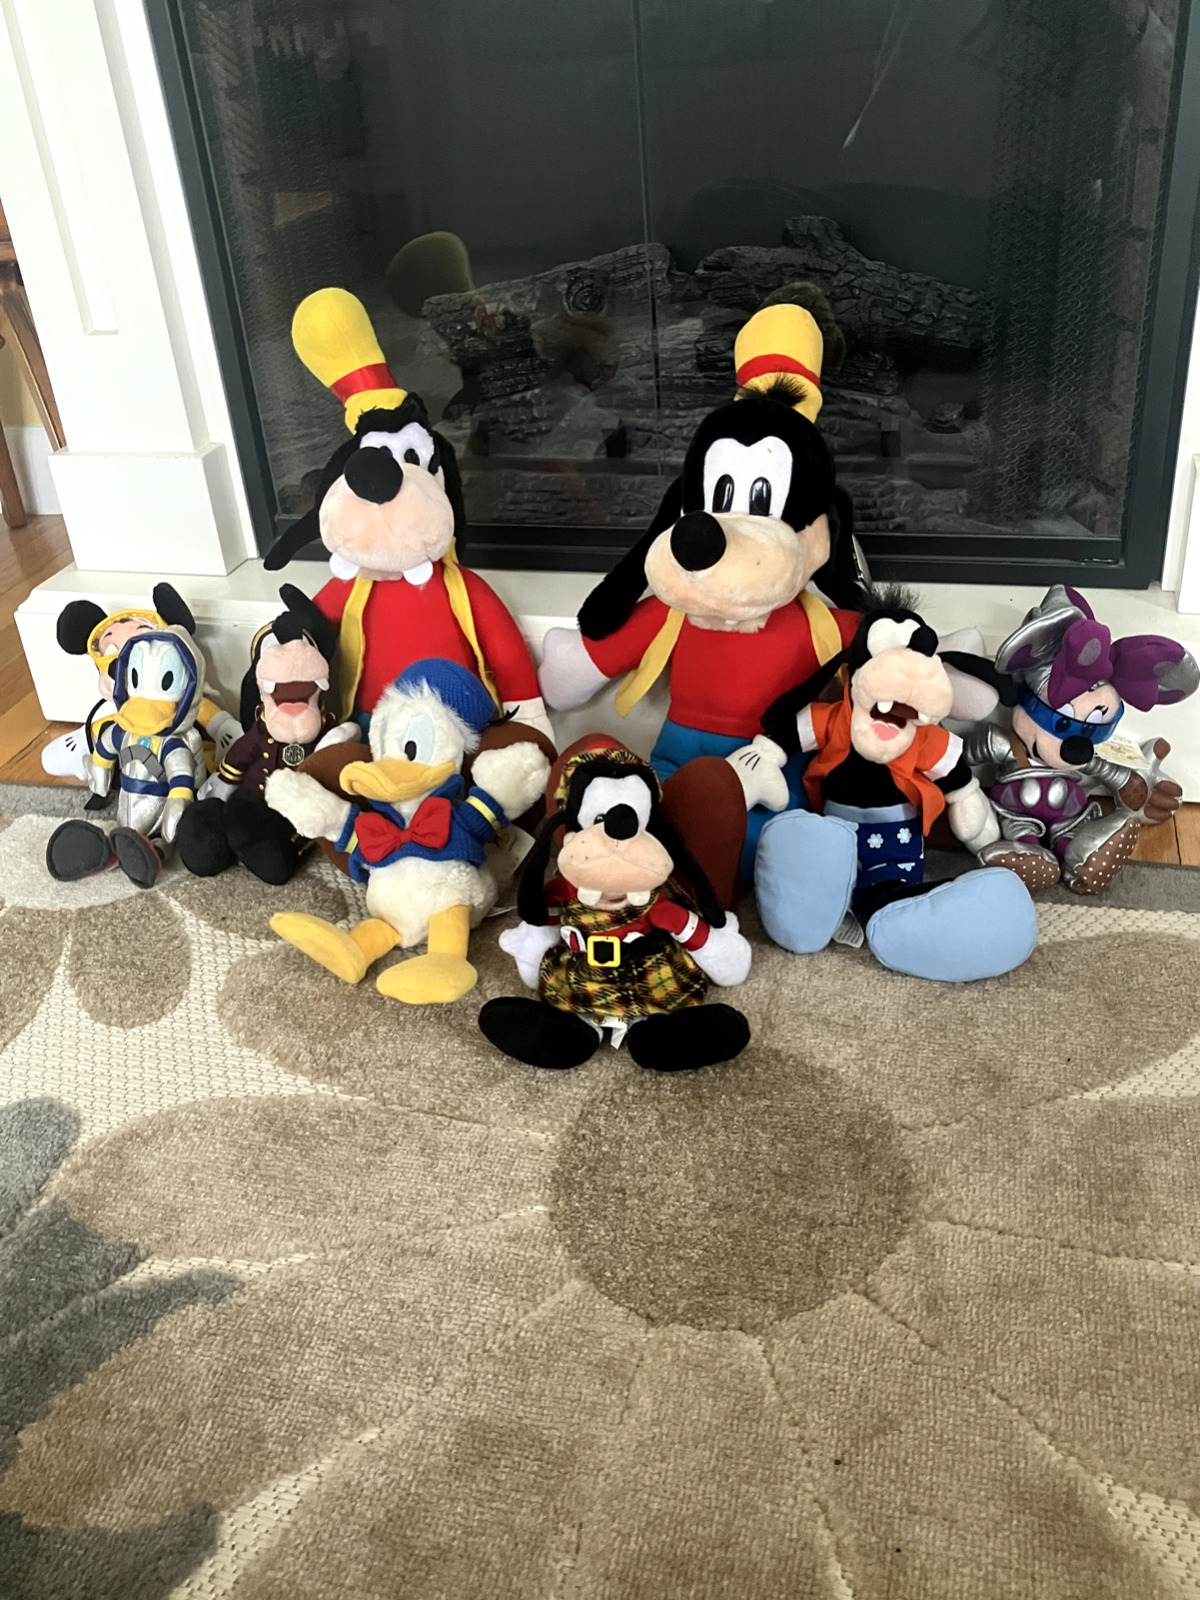 Vintage 1990's Disney Collectibles Goofy Minnie The Mouse Plushie Stuffed Toys